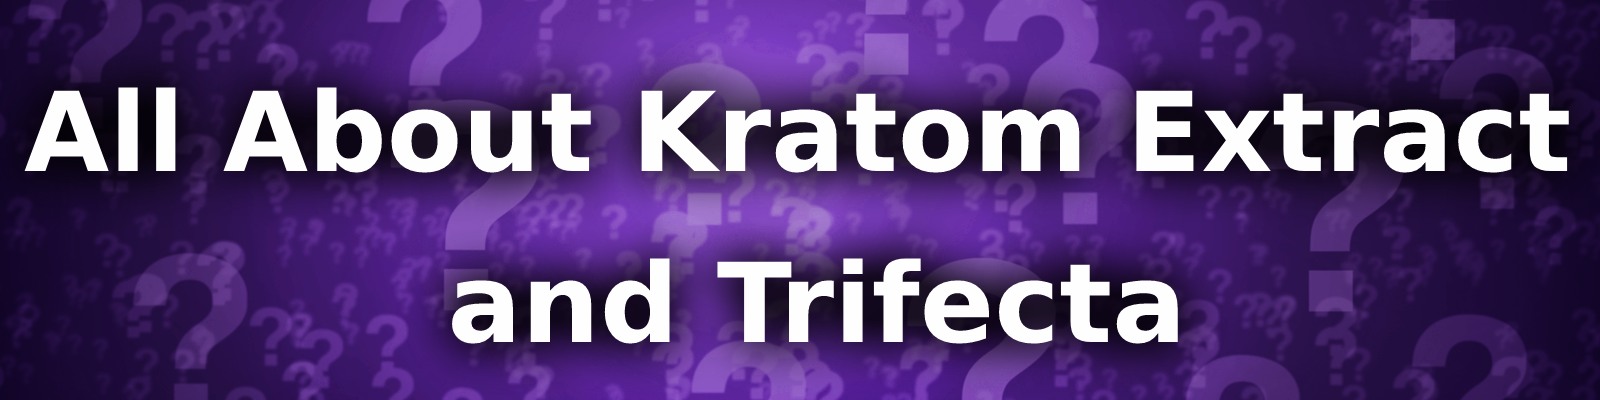 All About Kratom Extract and Trifecta